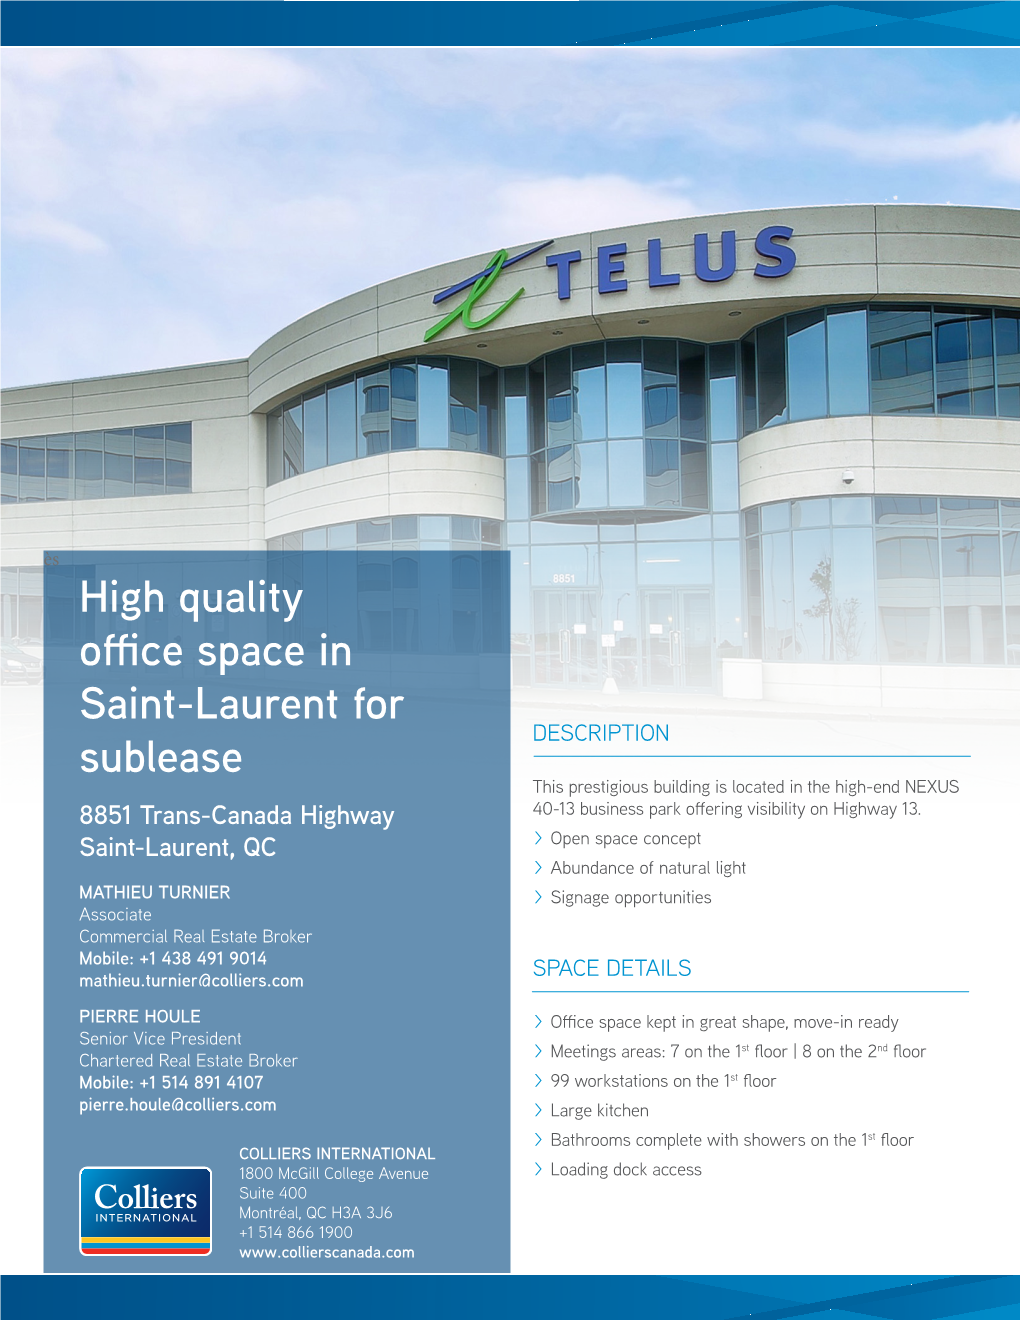 High Quality Office Space in Saint-Laurent for Sublease